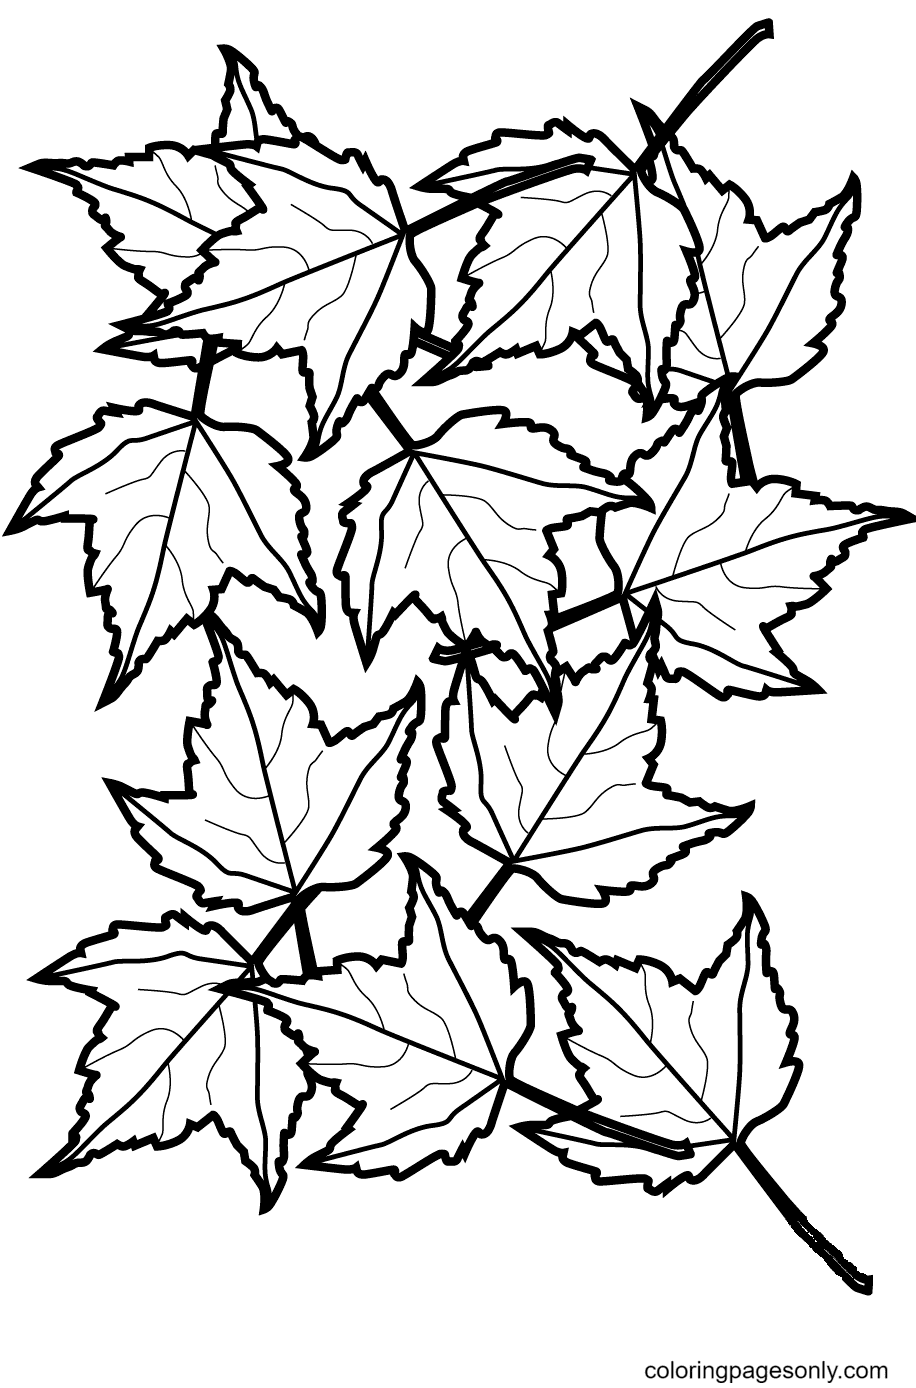 Autumn Maple Leaves Coloring Page